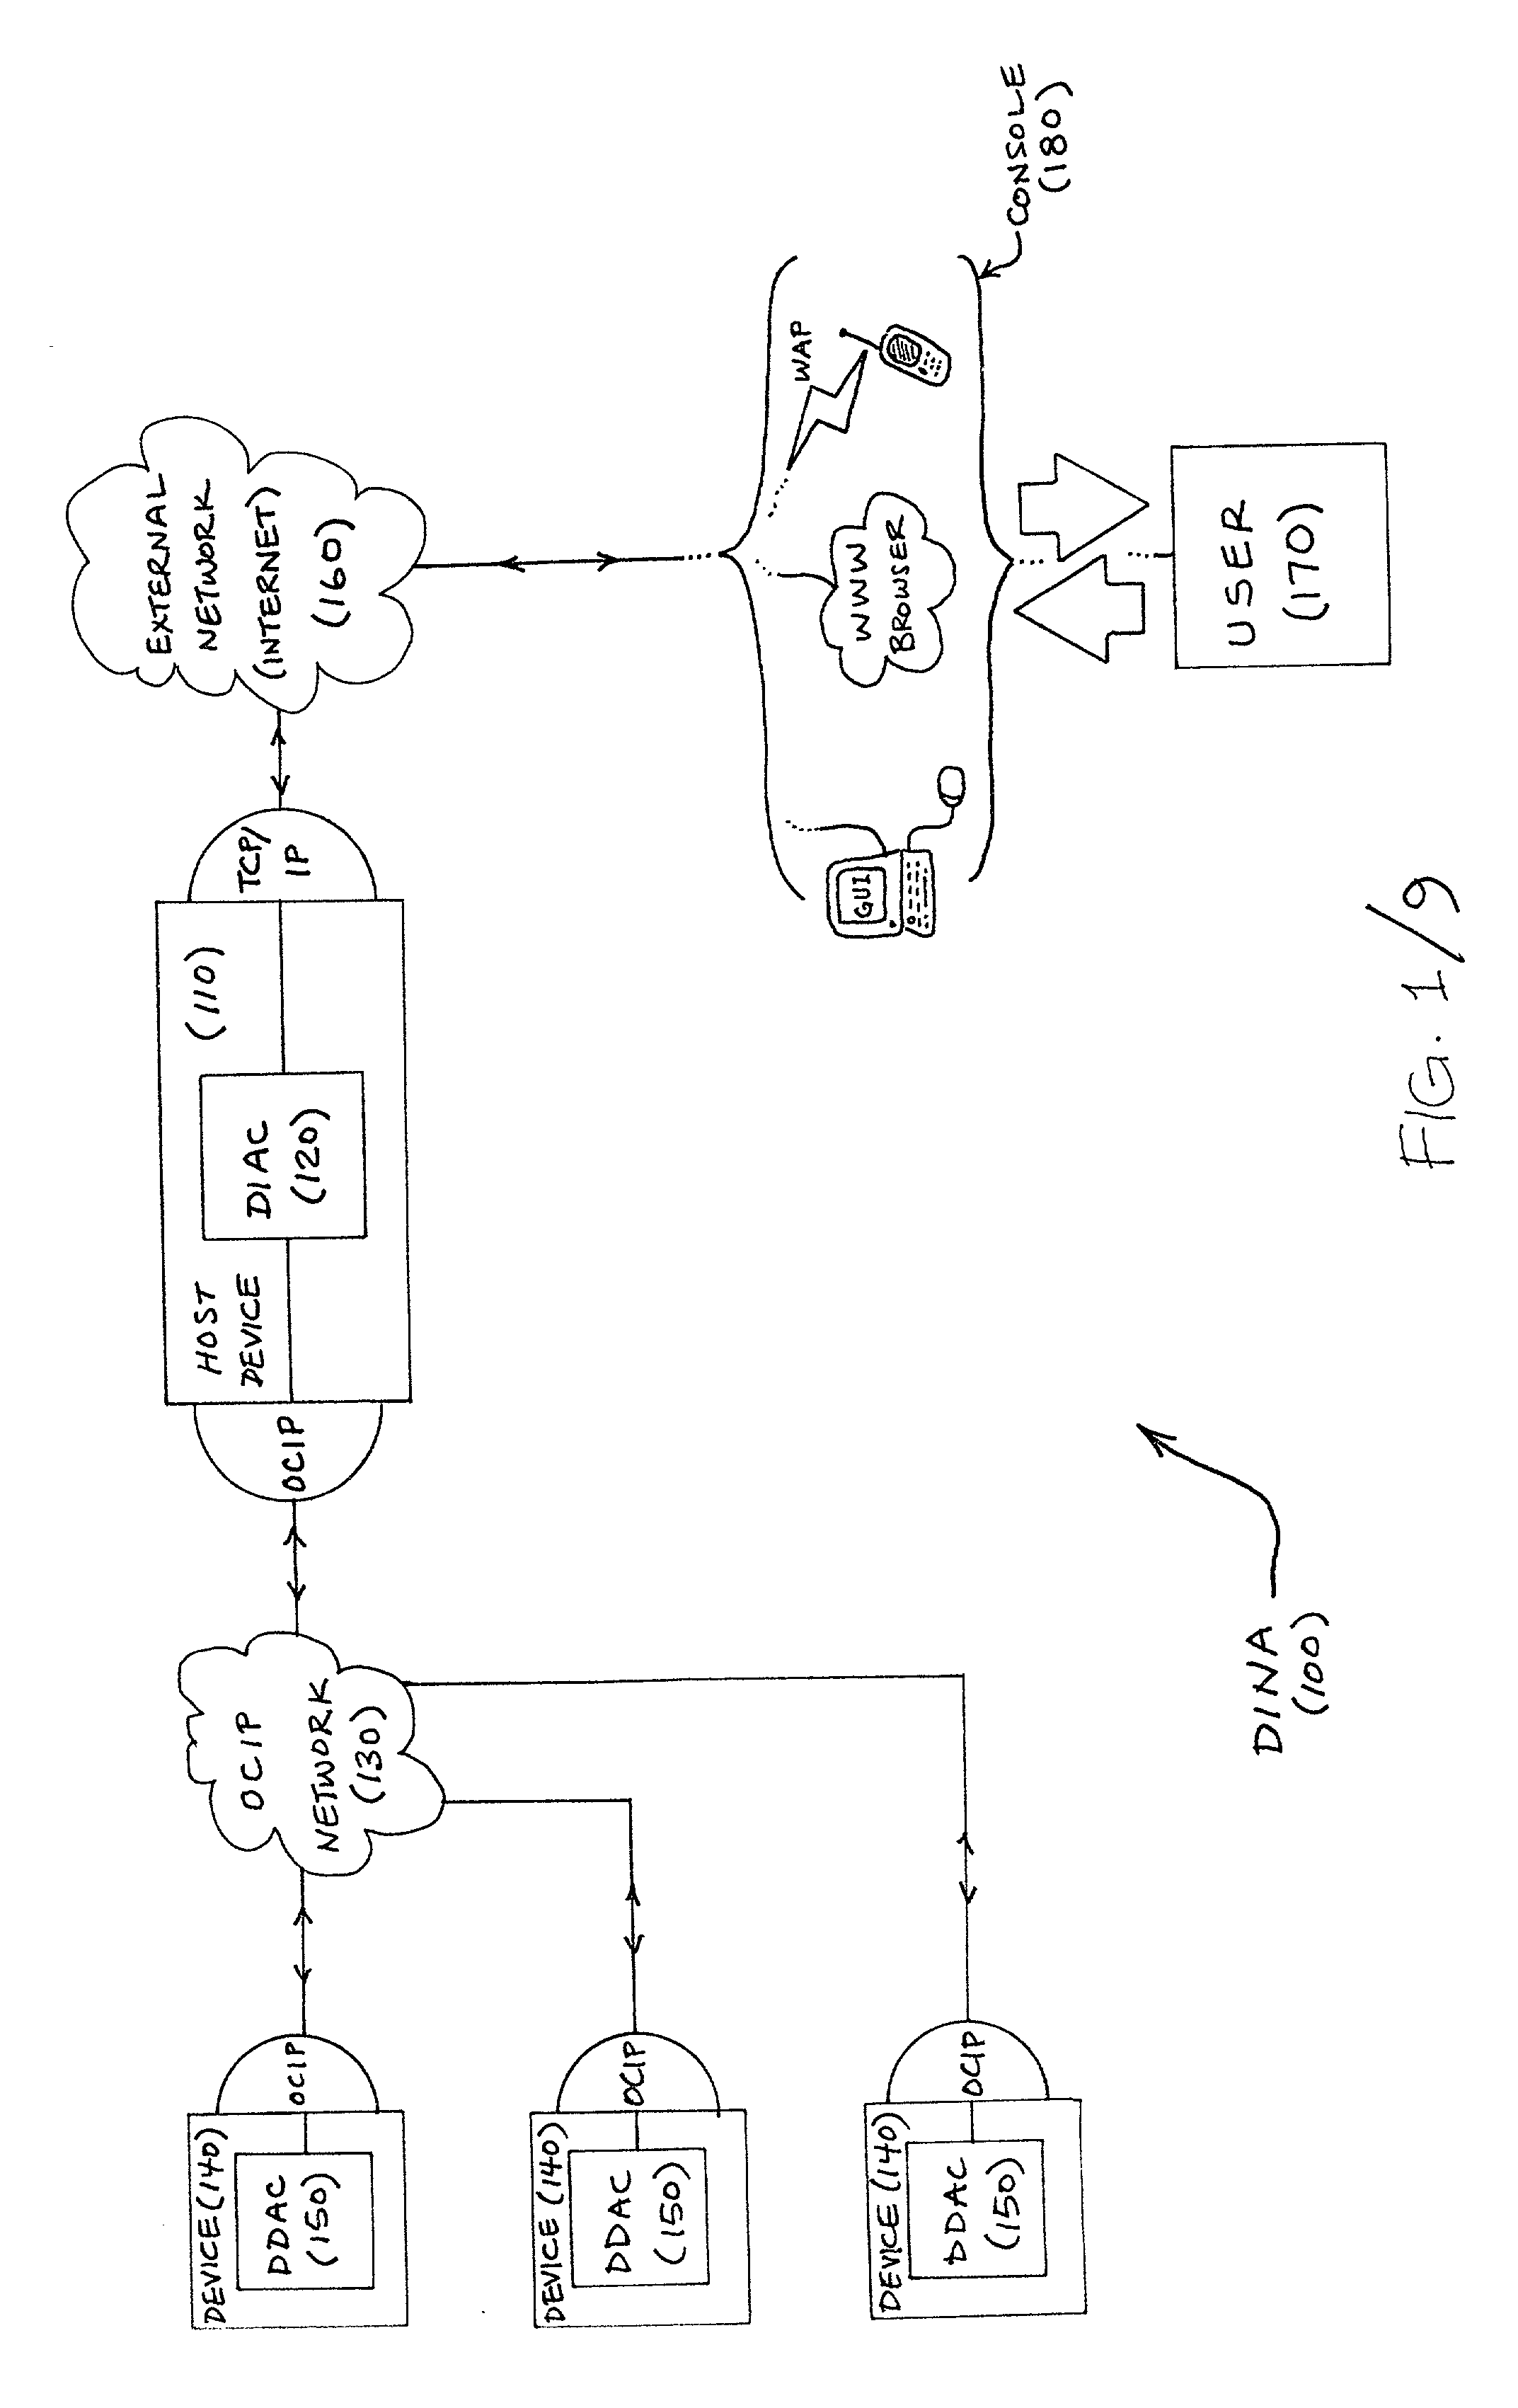 Method and apparatus for network-enablement of devices using device intelligence and network architecture